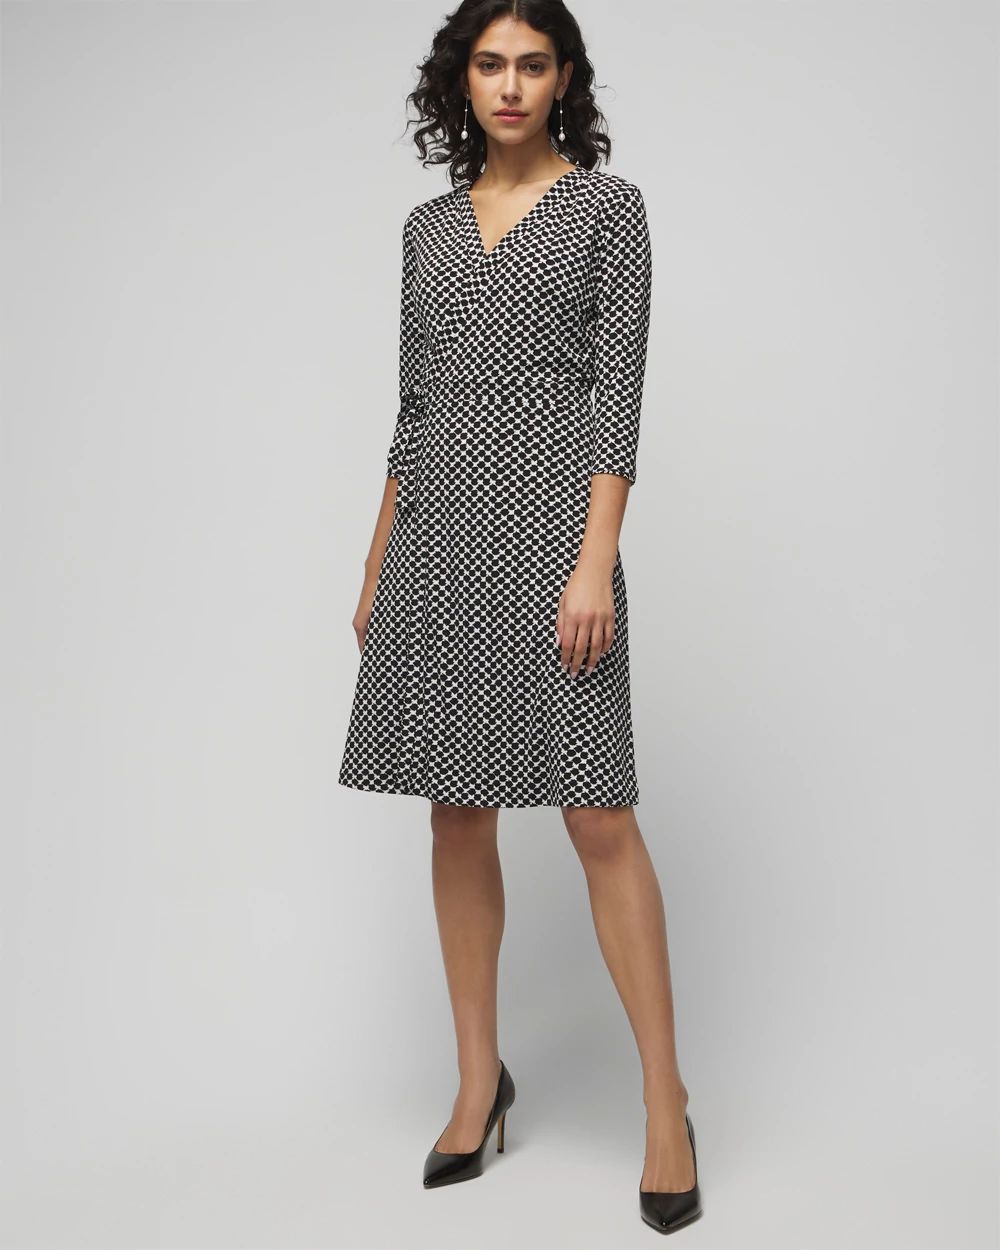 3/4 Sleeve Reversible Wrap Dress click to view larger image.